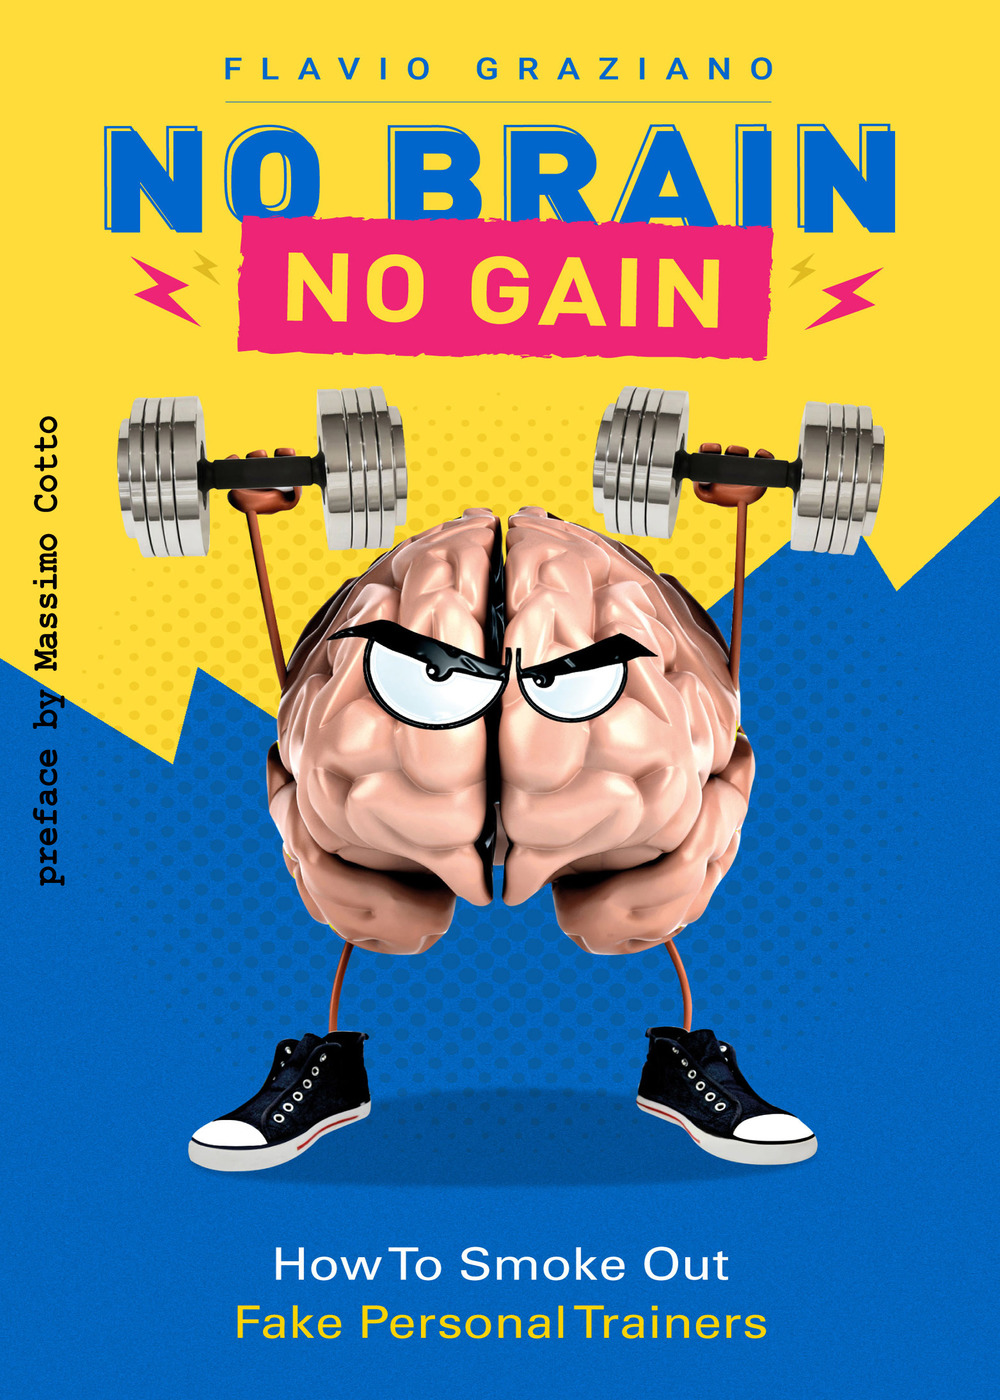 No brain. No gain. How to smoke out fake personal trainer